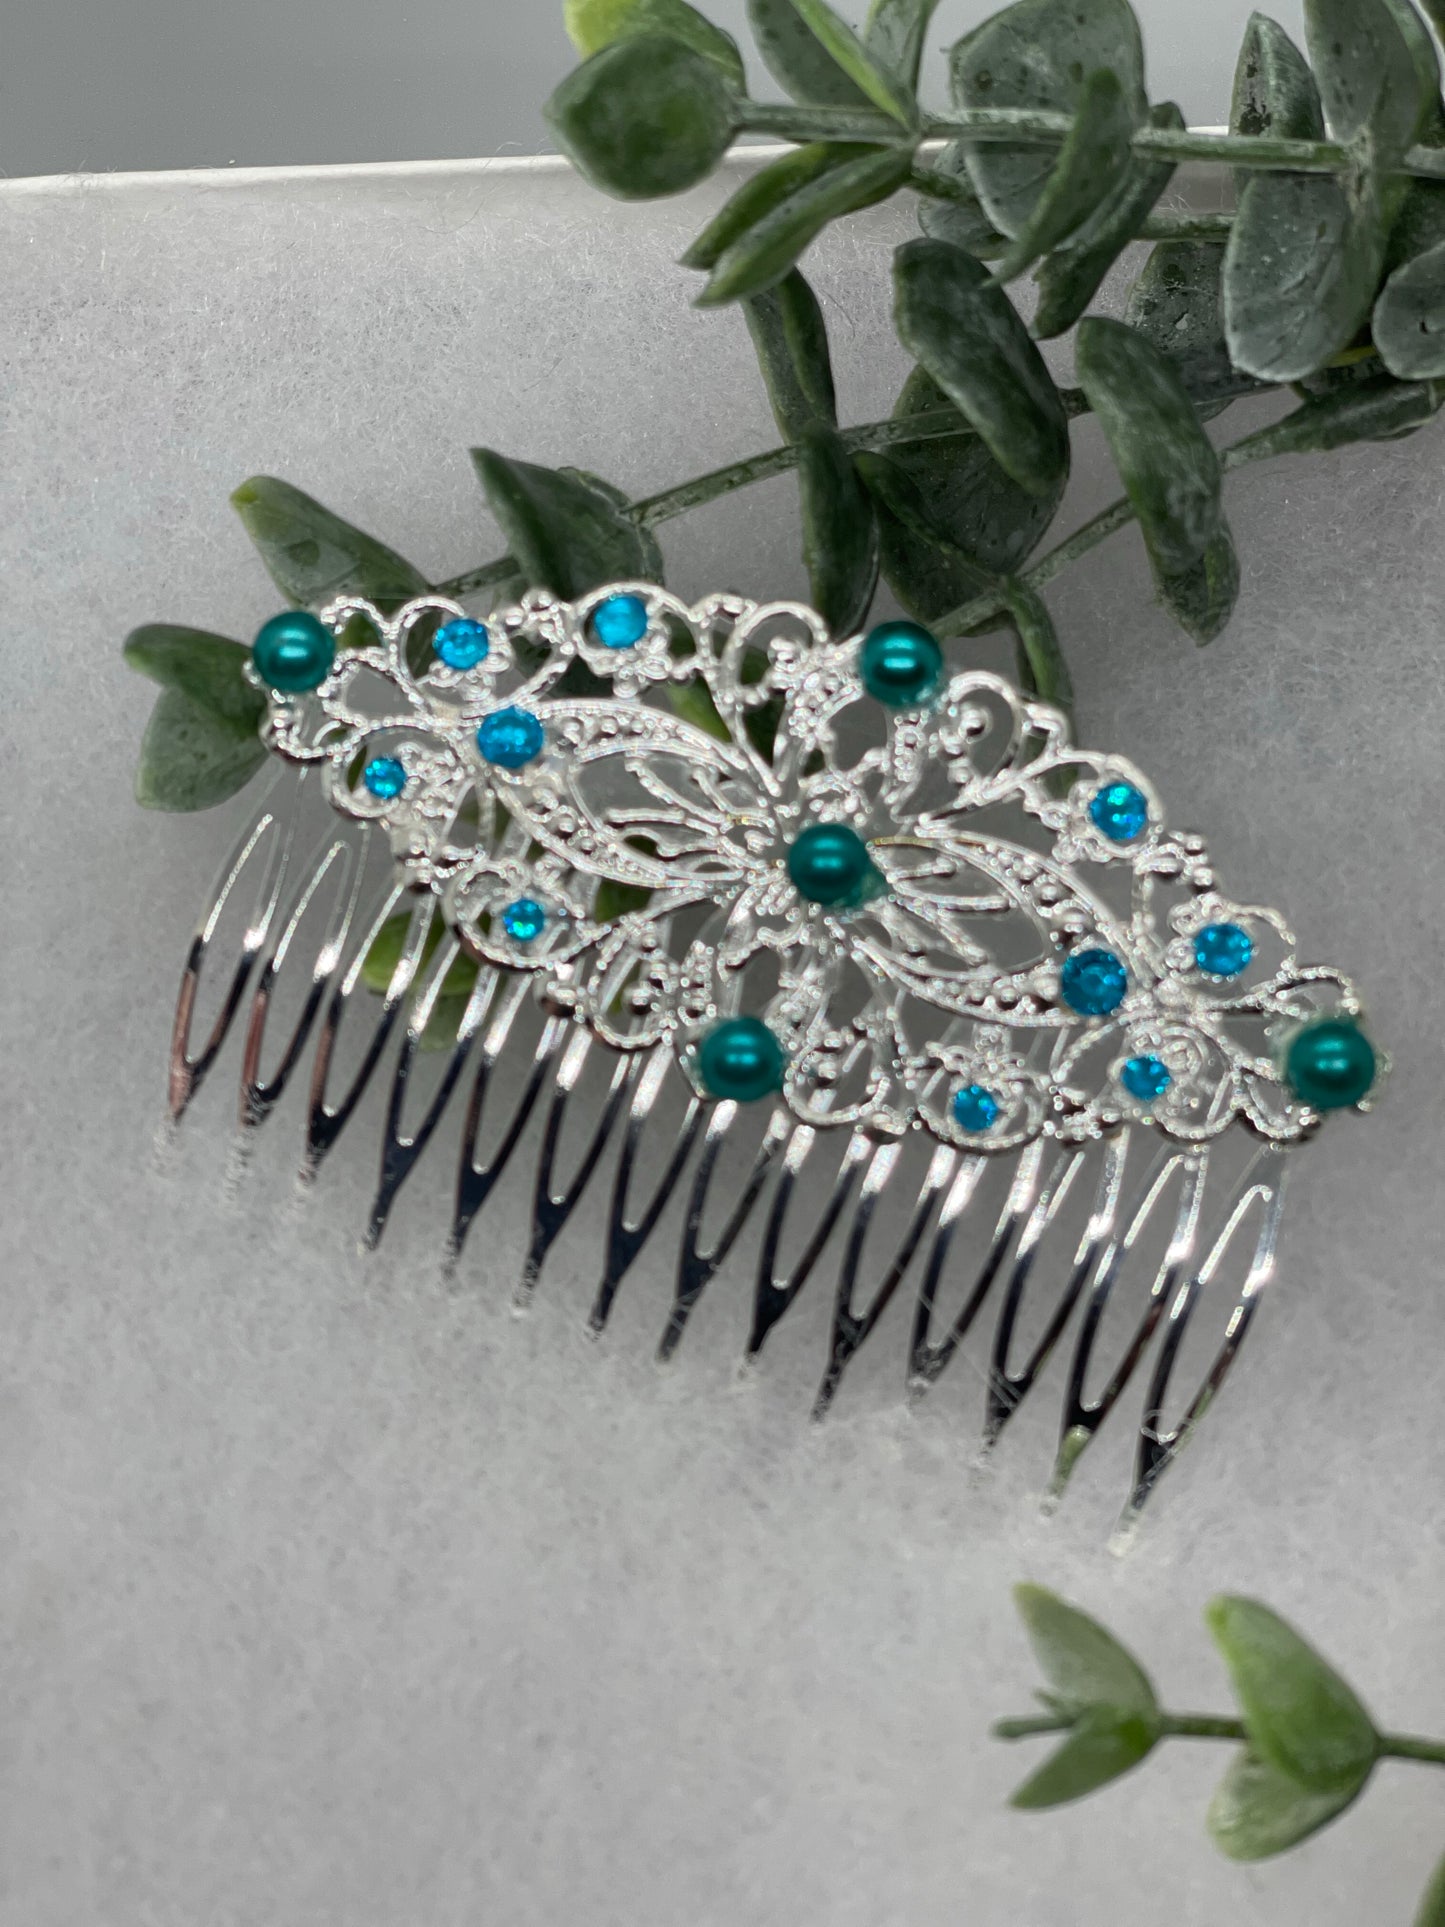 Green Teal crystal rhinestone pearls vintage style gold  side comb hair accessory accessories gift birthday 3.5” Metal side Comb